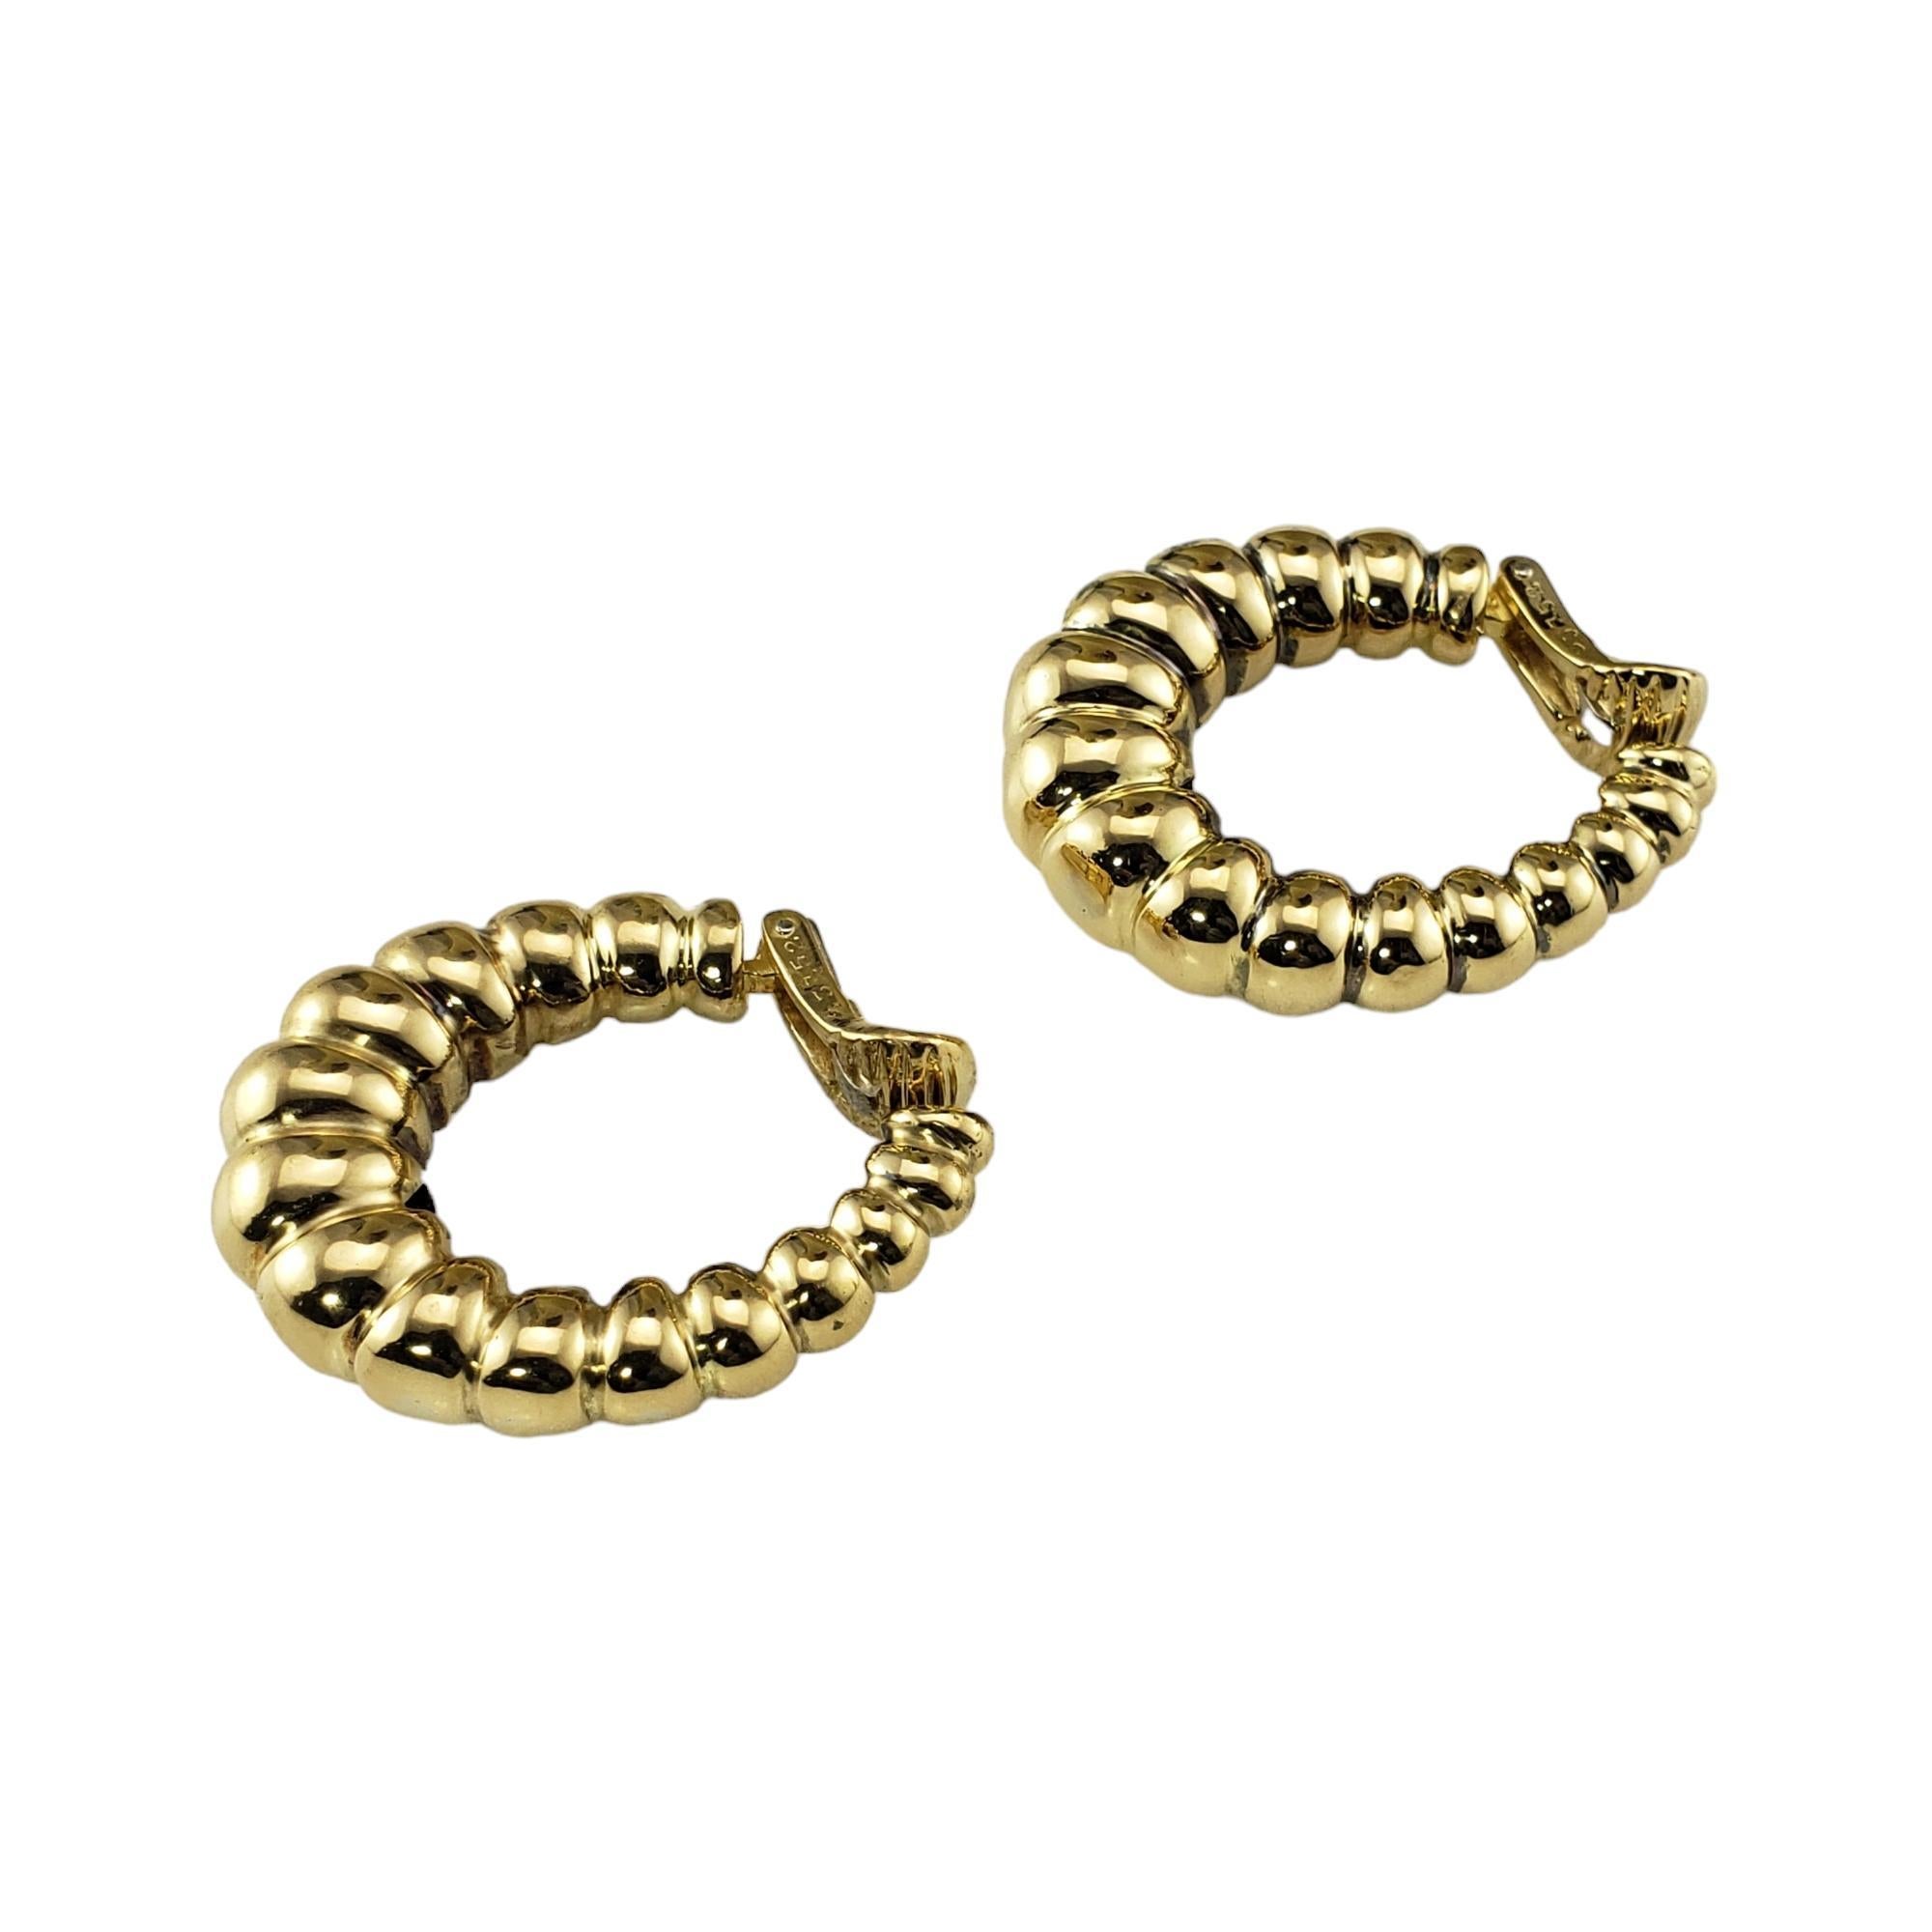 Cartier 18 Karat Yellow Gold Clip On Hoop Earrings #17086 In Good Condition For Sale In Washington Depot, CT